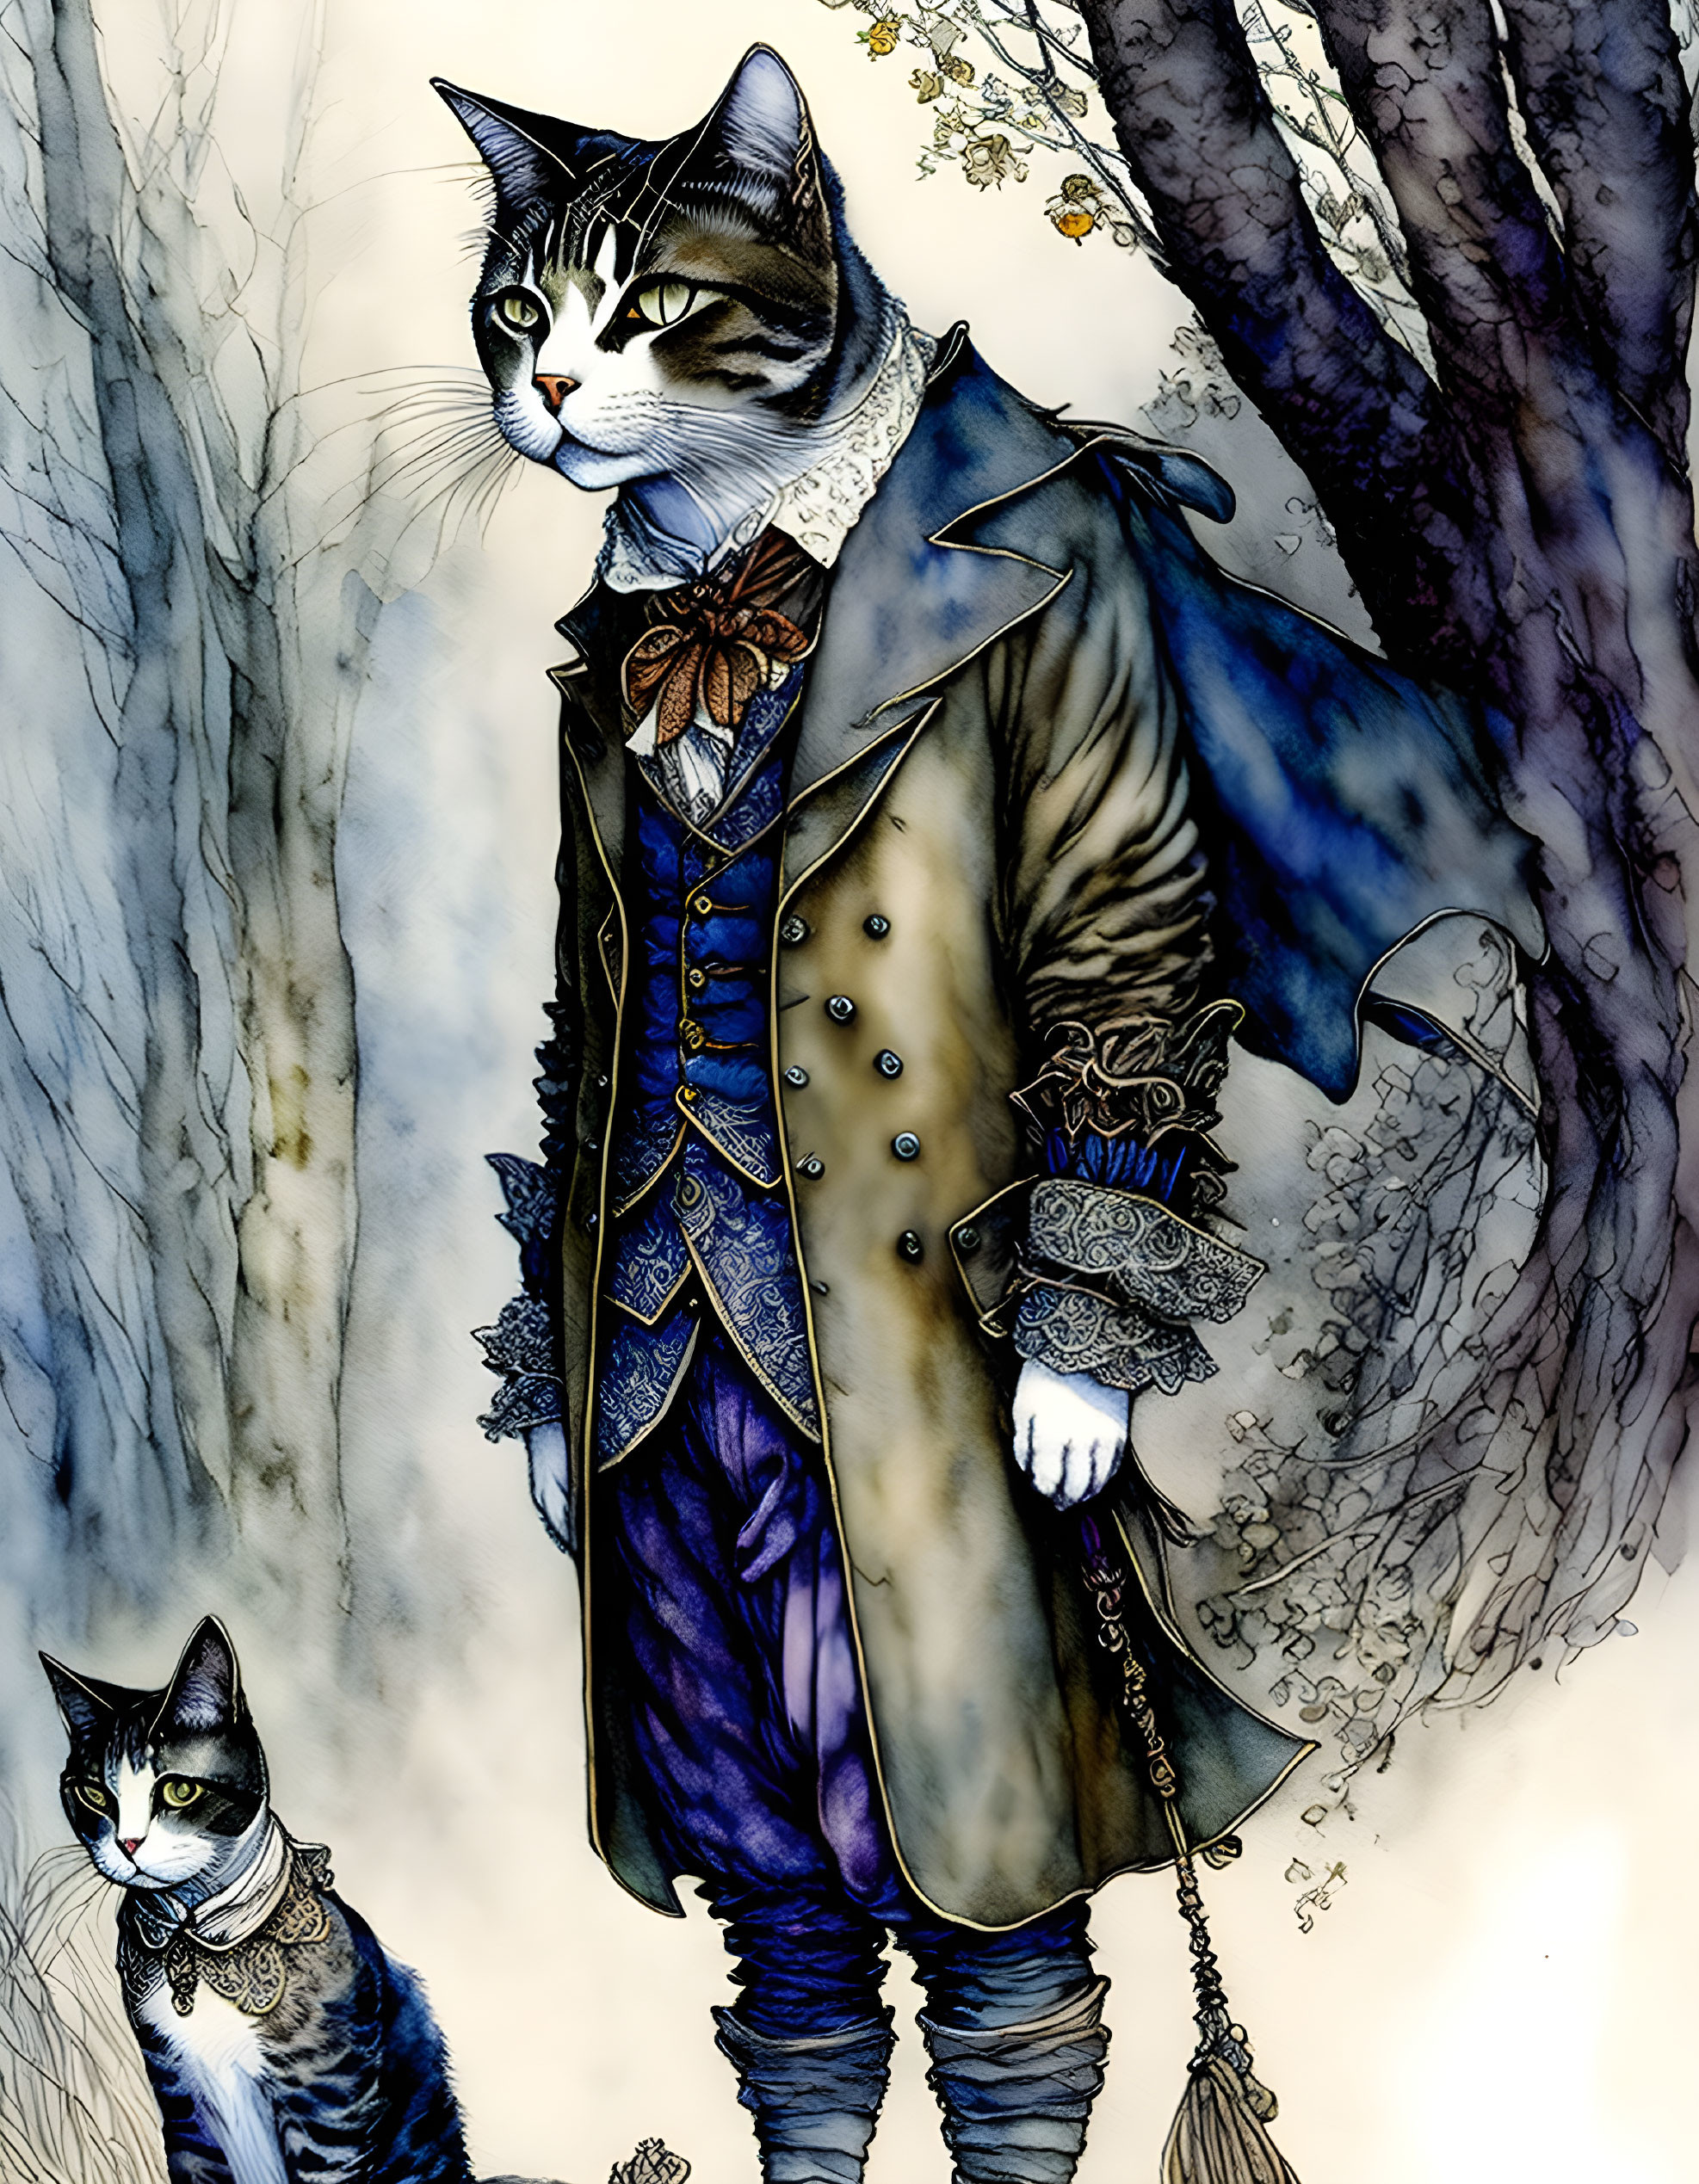 Anthropomorphic cats in regal vintage attire in forest setting